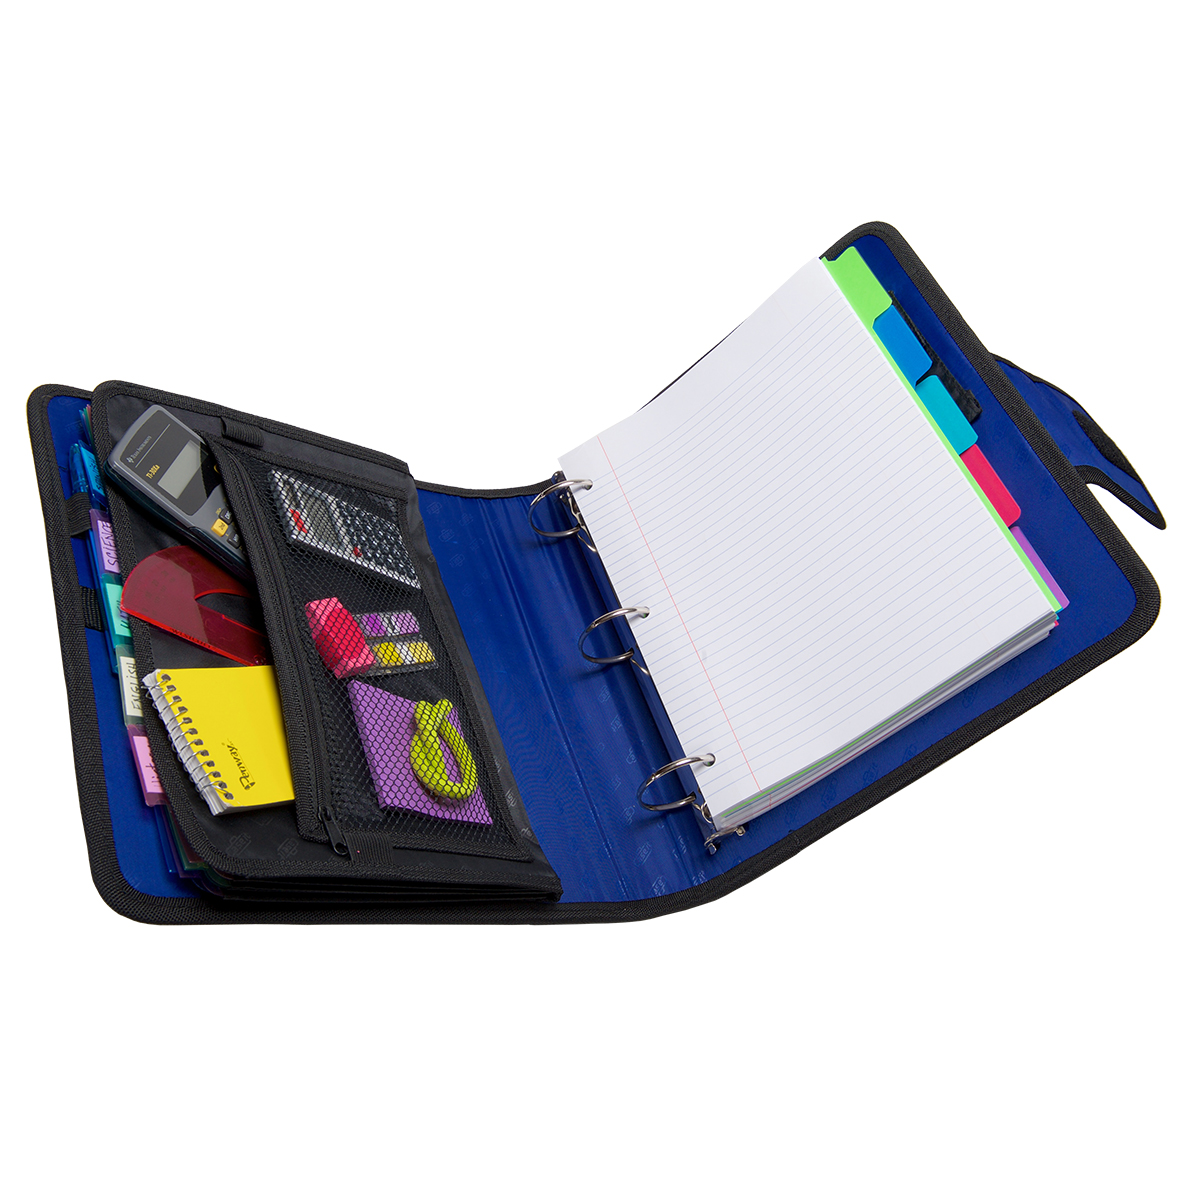 The Pro Binder - Case•it Case-it professional organization at your  fingertips